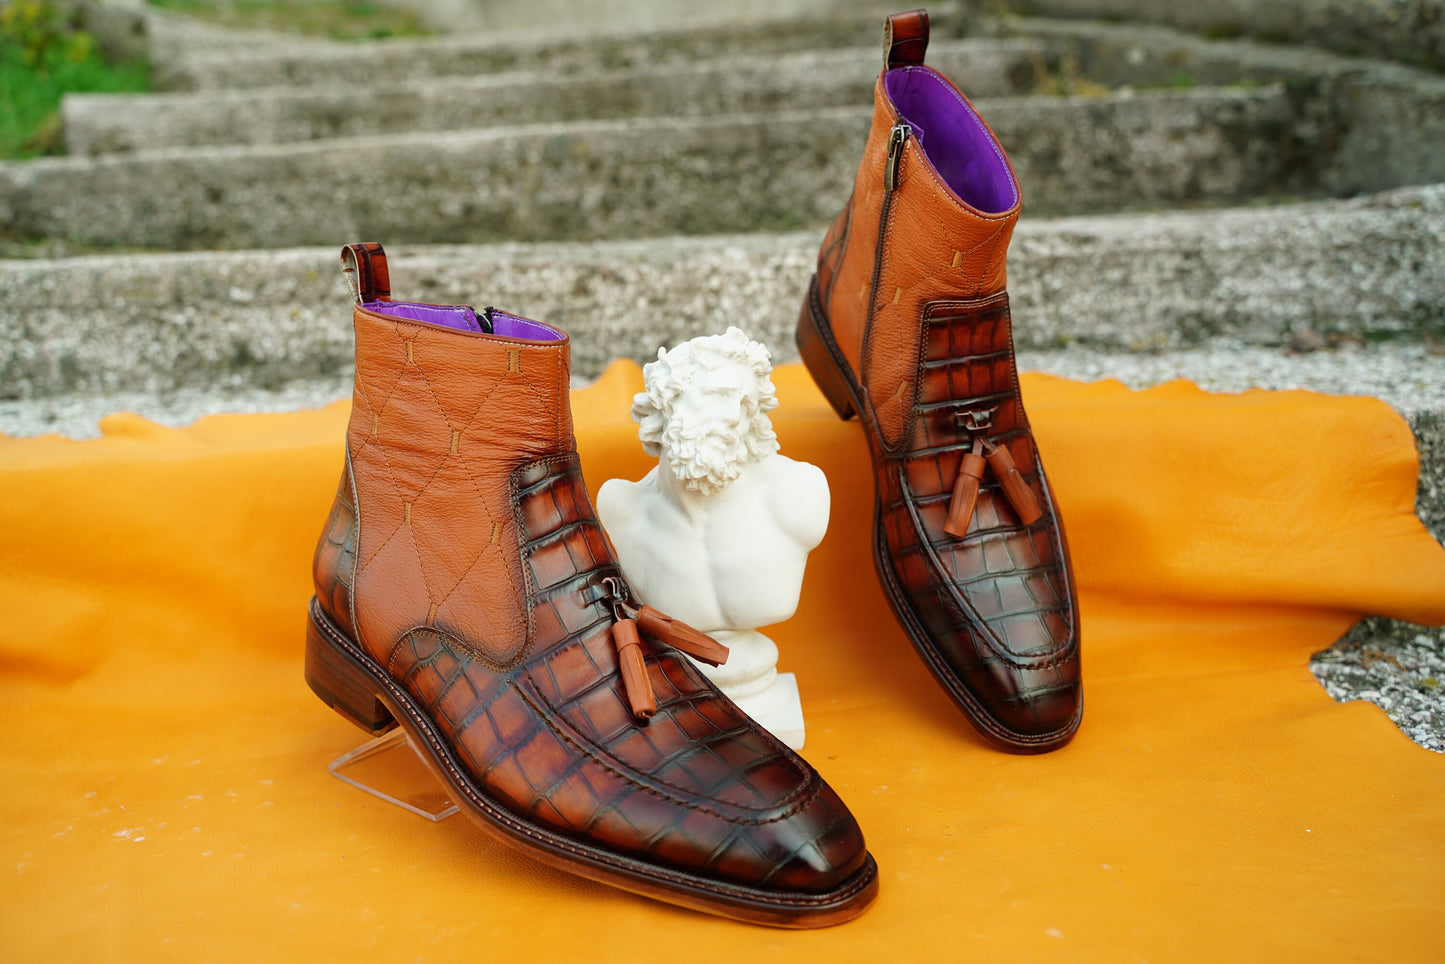 Chukka Boots For Men's, Leather Men Boots, Handmade Made to Order Men Boots,Dress & Casual Wear Boots,Men Leather Boot